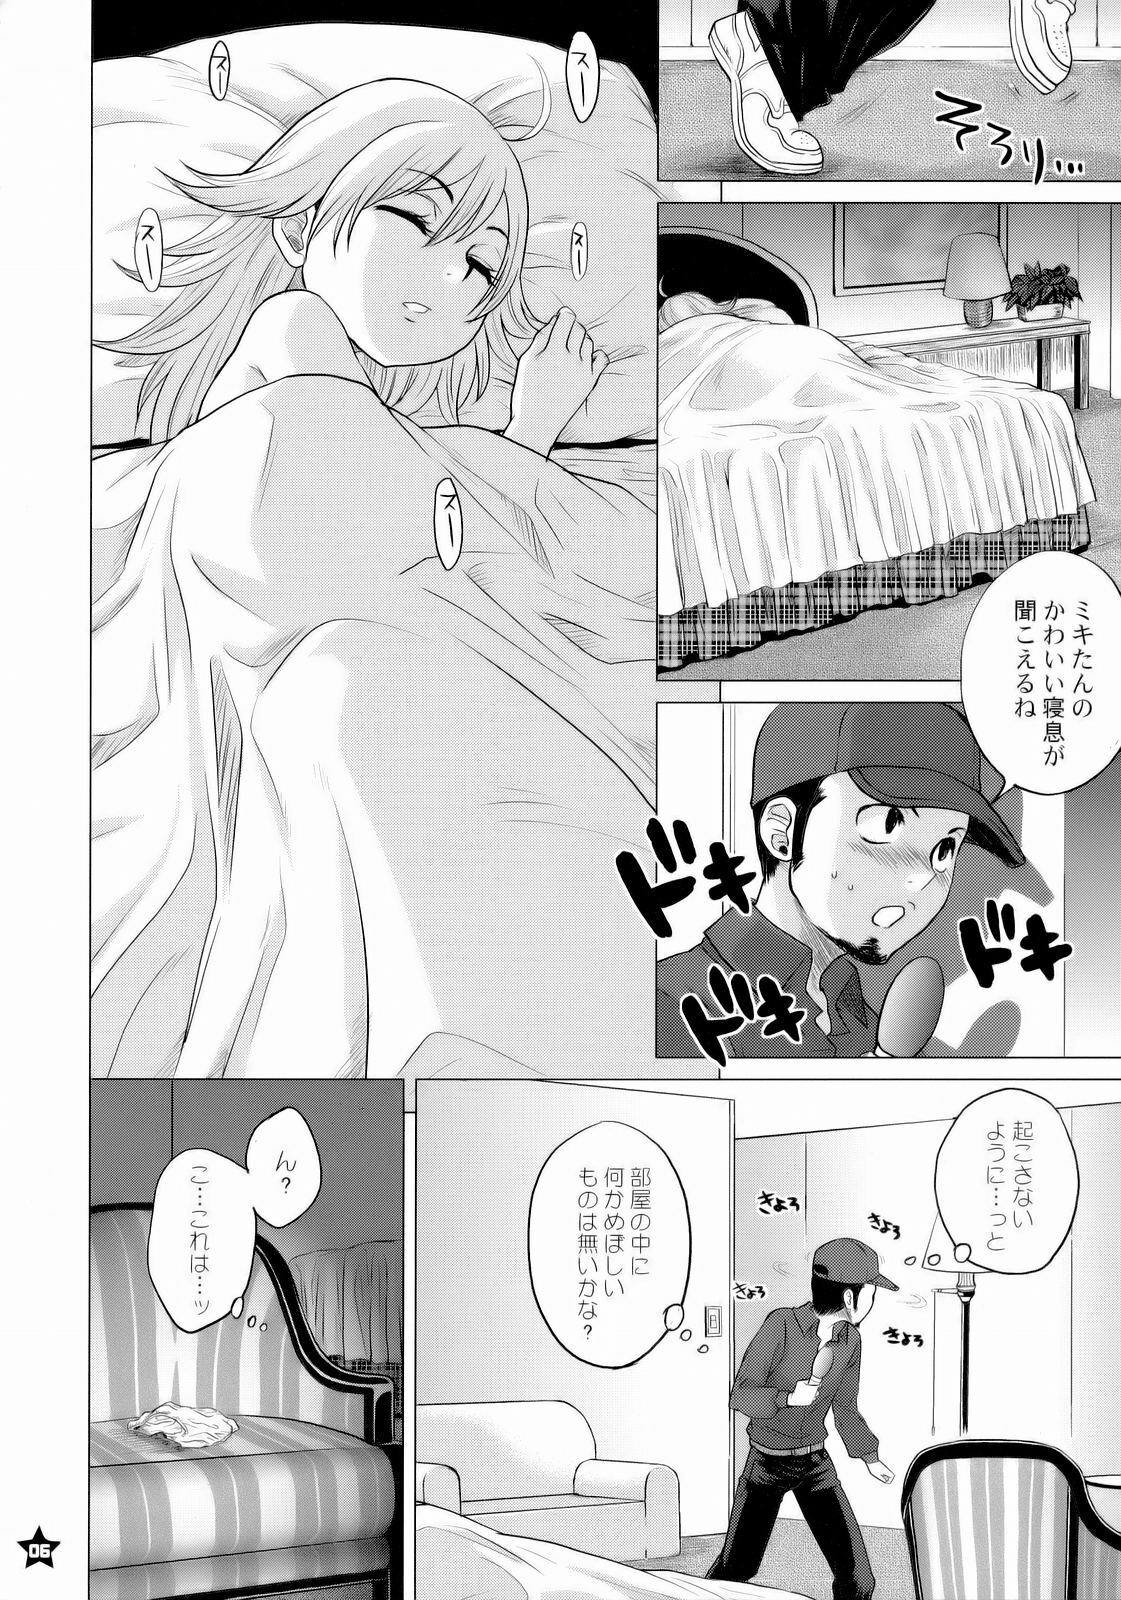 (C72) [Todd Special (Todd Oyamada)] Dokkiri-relations (THE IDOLM@STER) page 5 full